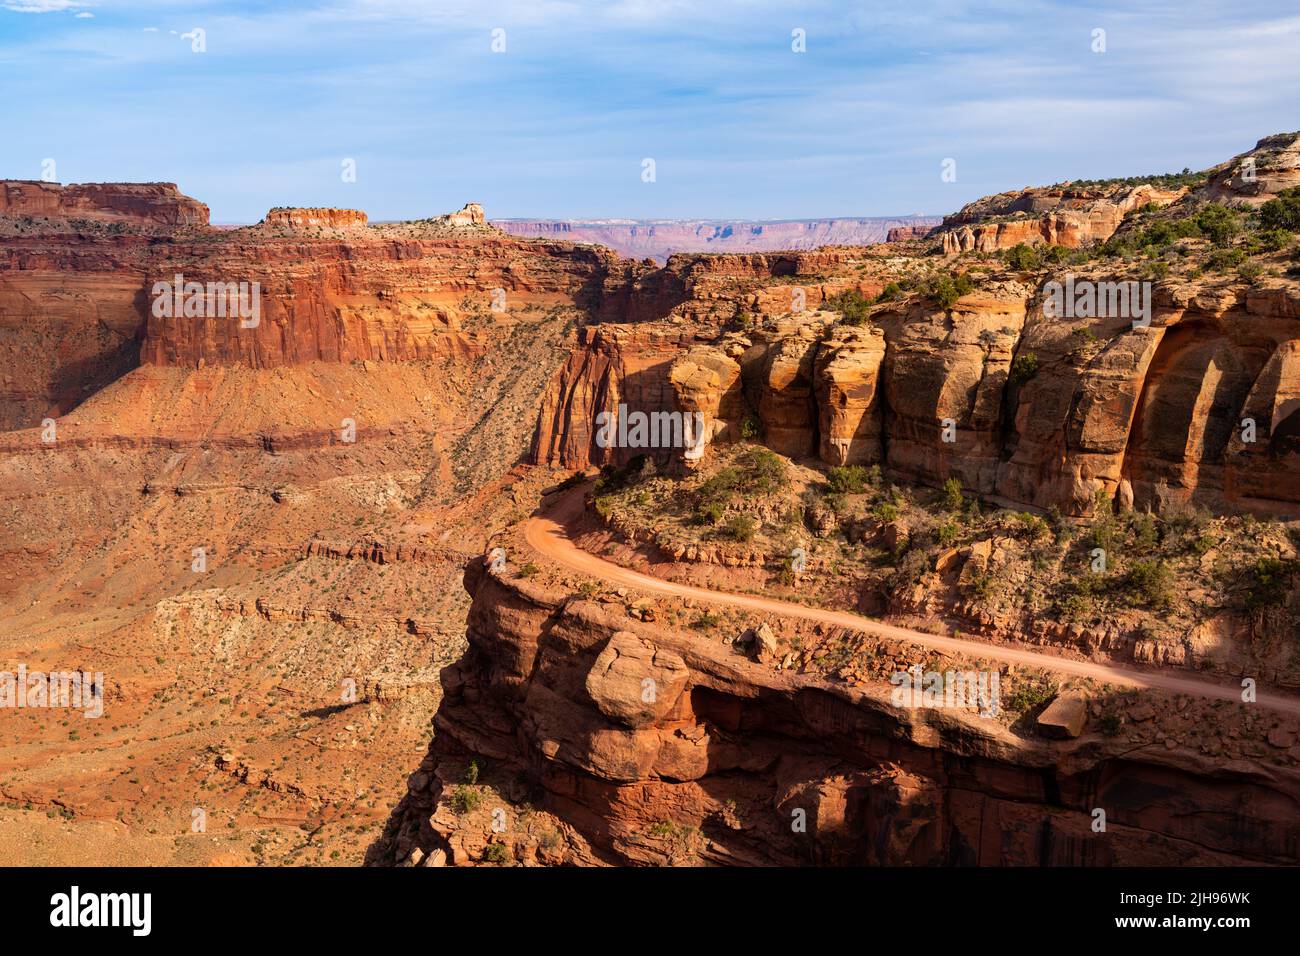 View of the 4WD Shafer Trail curving high above Shafer Canyon in the rugged landscape of Canyonlands National Park, Utah Stock Photo